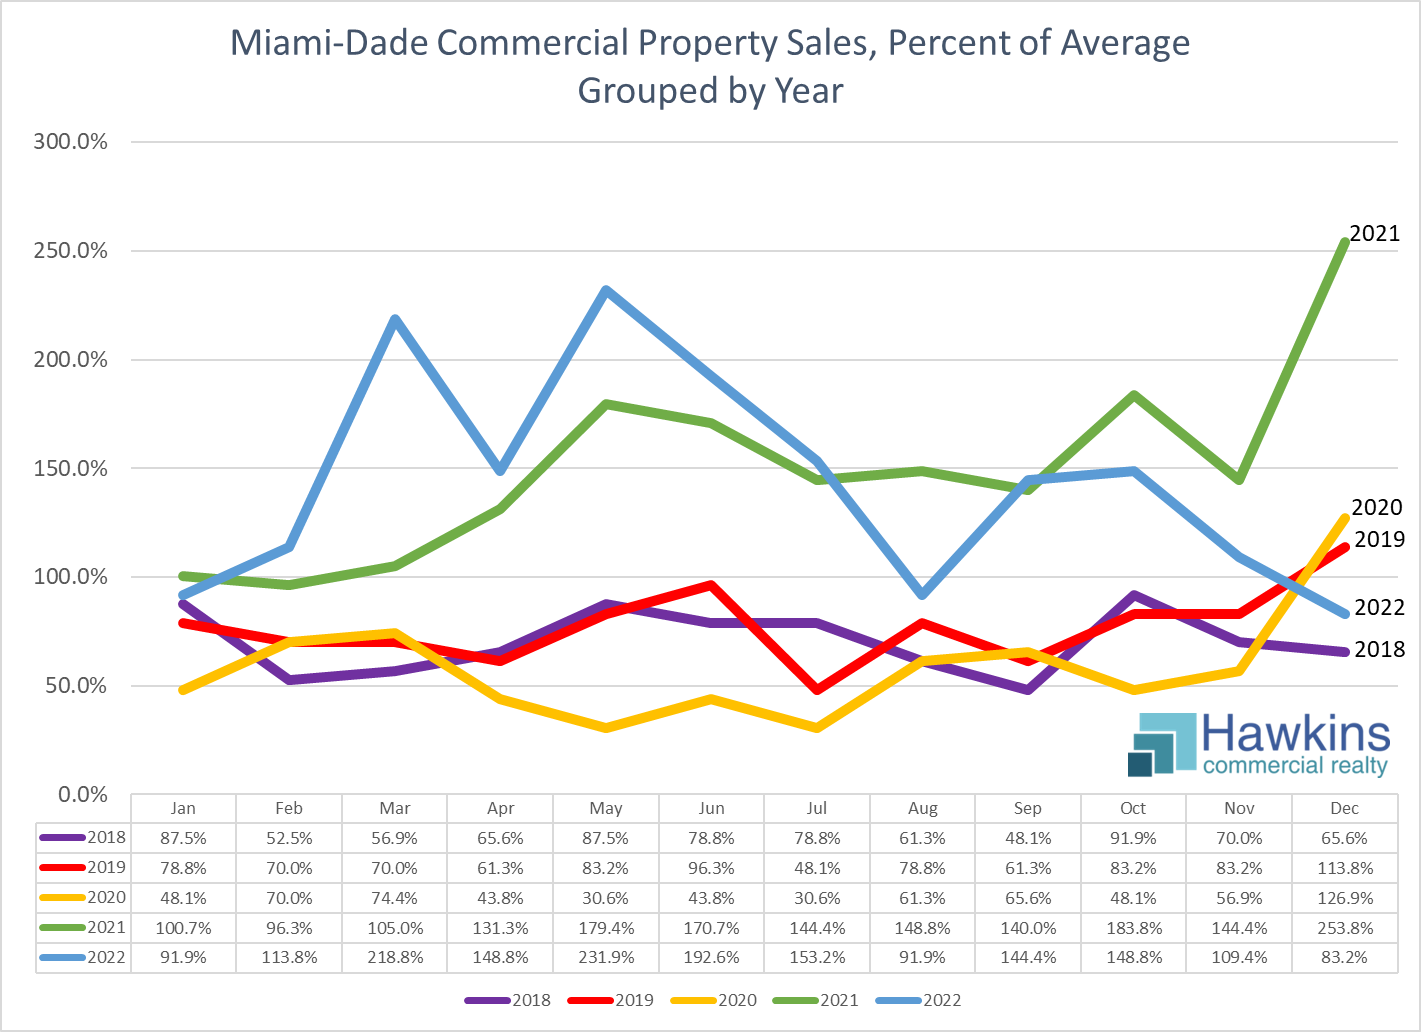 Miami-Dade Commercial Property Sales, Percent of Avg, Grouped by Year: January 2018 to December 2022 Commercial MLS Miami Association of Realtors, Property Types Land-Commercial/Business/Agricultural/Industrial, Commercial/Industrial, within Miami-Dade County, Price $1,000,000+, Calculated from 1,371 Listings, Dataset Obtained 1/10/23